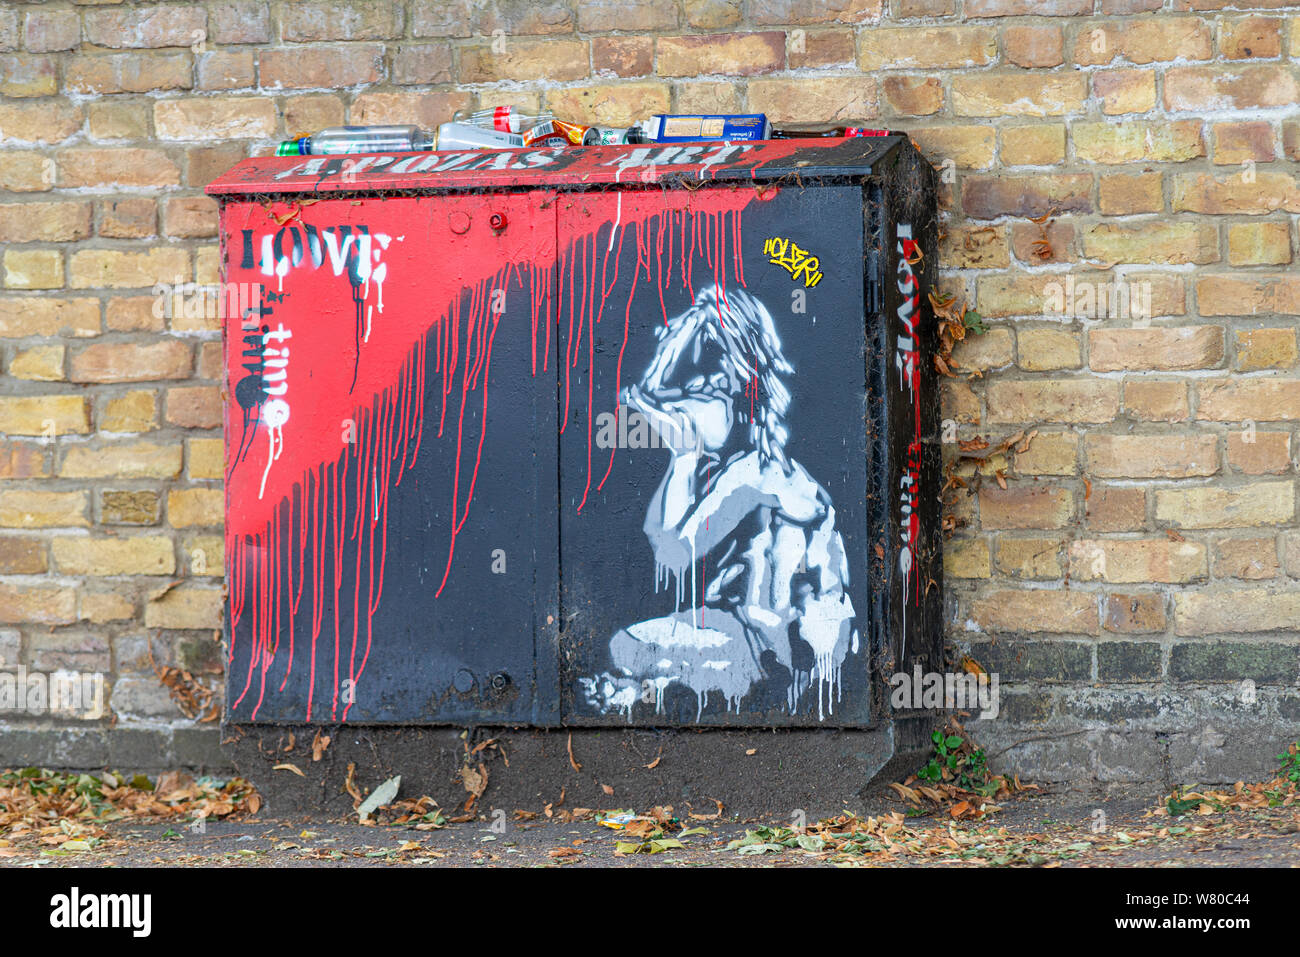 Banksy style artwork of a crying child on a telecommunications junction box, with red paint running down like blood and the words Love Time. Rubbish Stock Photo